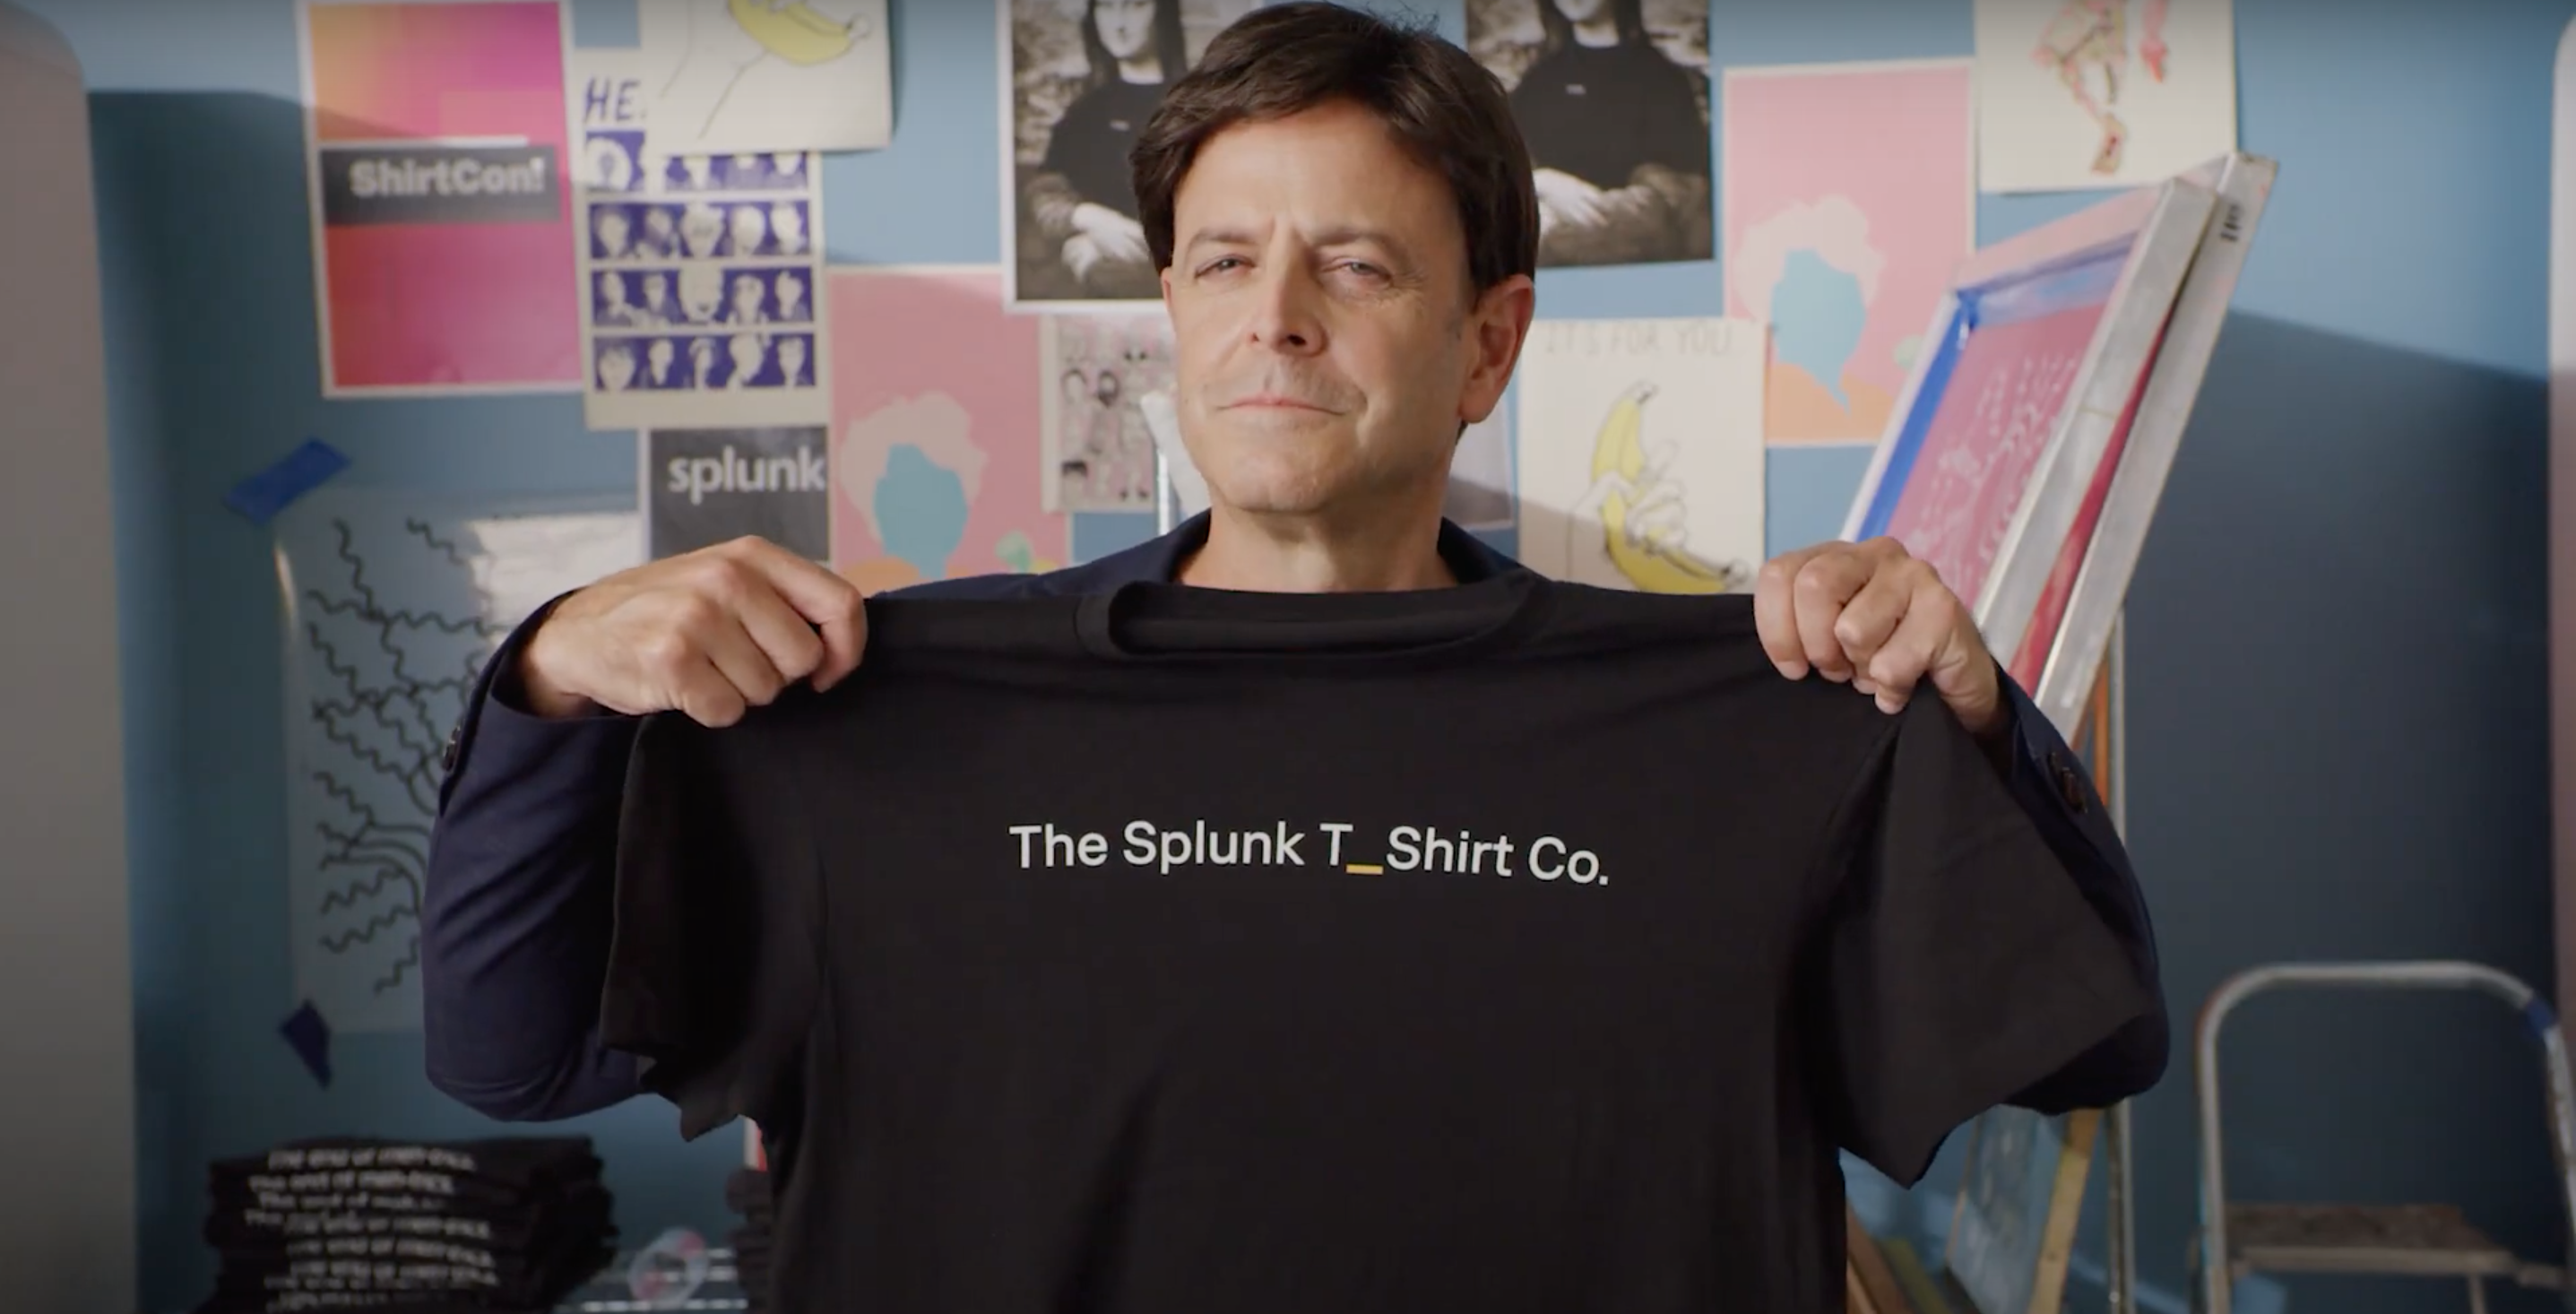 Behind the scenes at Splunk's T-Shirt company spin-off